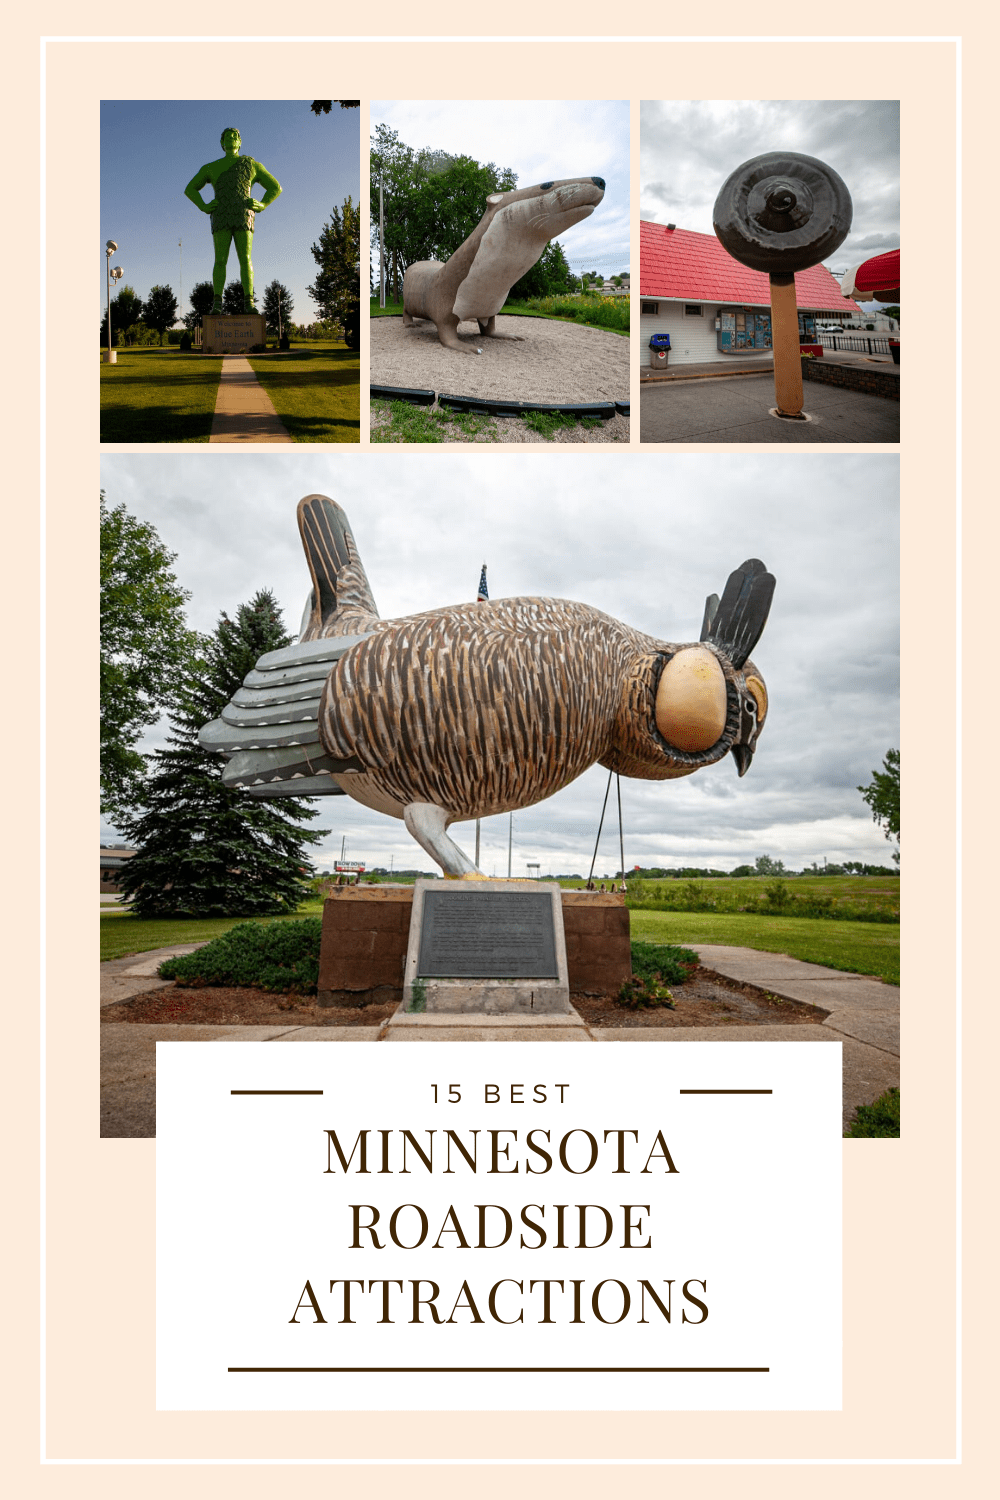 The best Minnesota roadside attractions to visit on a Minnesota road trip or weekend getaway. Add these roadside oddities and road trip stops to your bucket list and visit these roadside attractions in Minnesota on your next travel adventure. #MinnesotaRoadsideAttractions #MinnesotaRoadsideAttraction #RoadsideAttractions #RoadsideAttraction #RoadTrip #MinnesotaRoadTrip #MinnesotaRoadTripBucketLists #MinnesotaBucketList #MinnesotaRoadTripMap #MinnesotaRoadTripIdeas #WeirdRoadsideAttractions